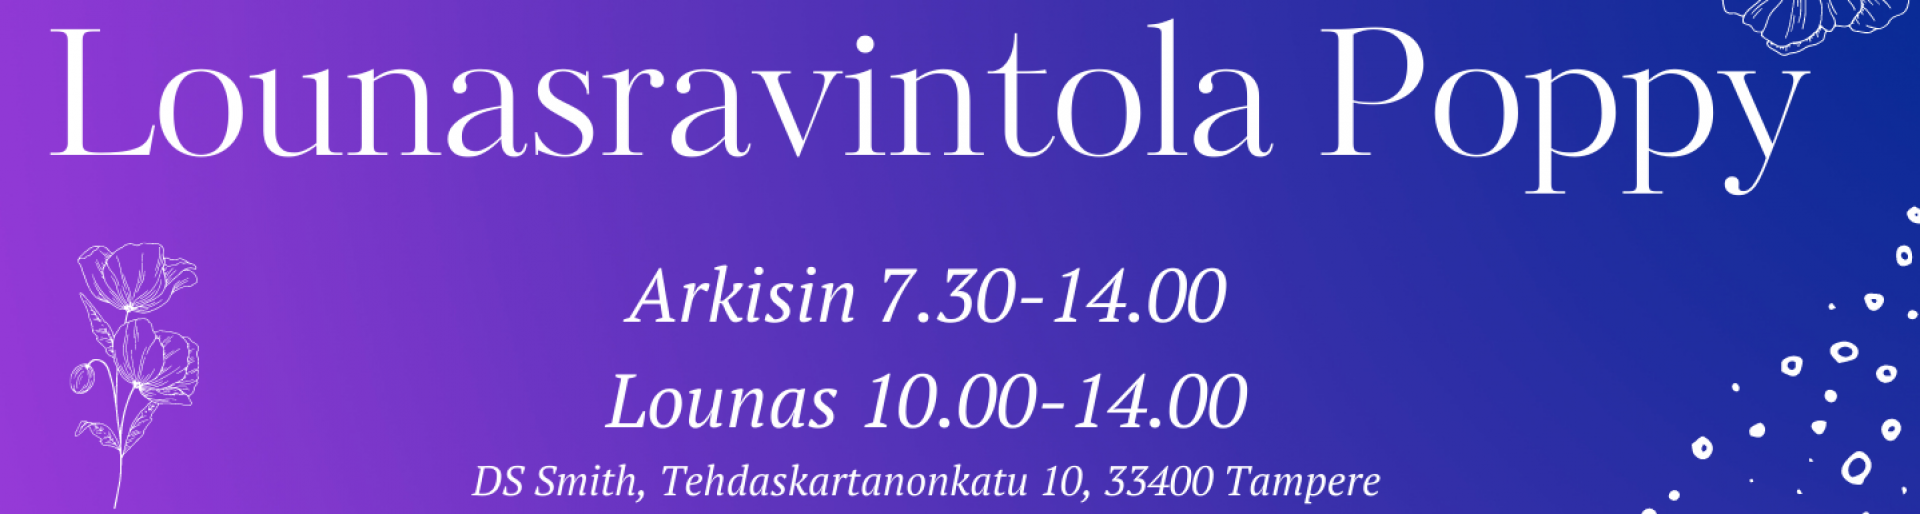 http://www.ravintolapoppy.fi/wp-content/uploads/2022/03/cropped-cropped-Happiness-Cultivate-Twitter-Header.png